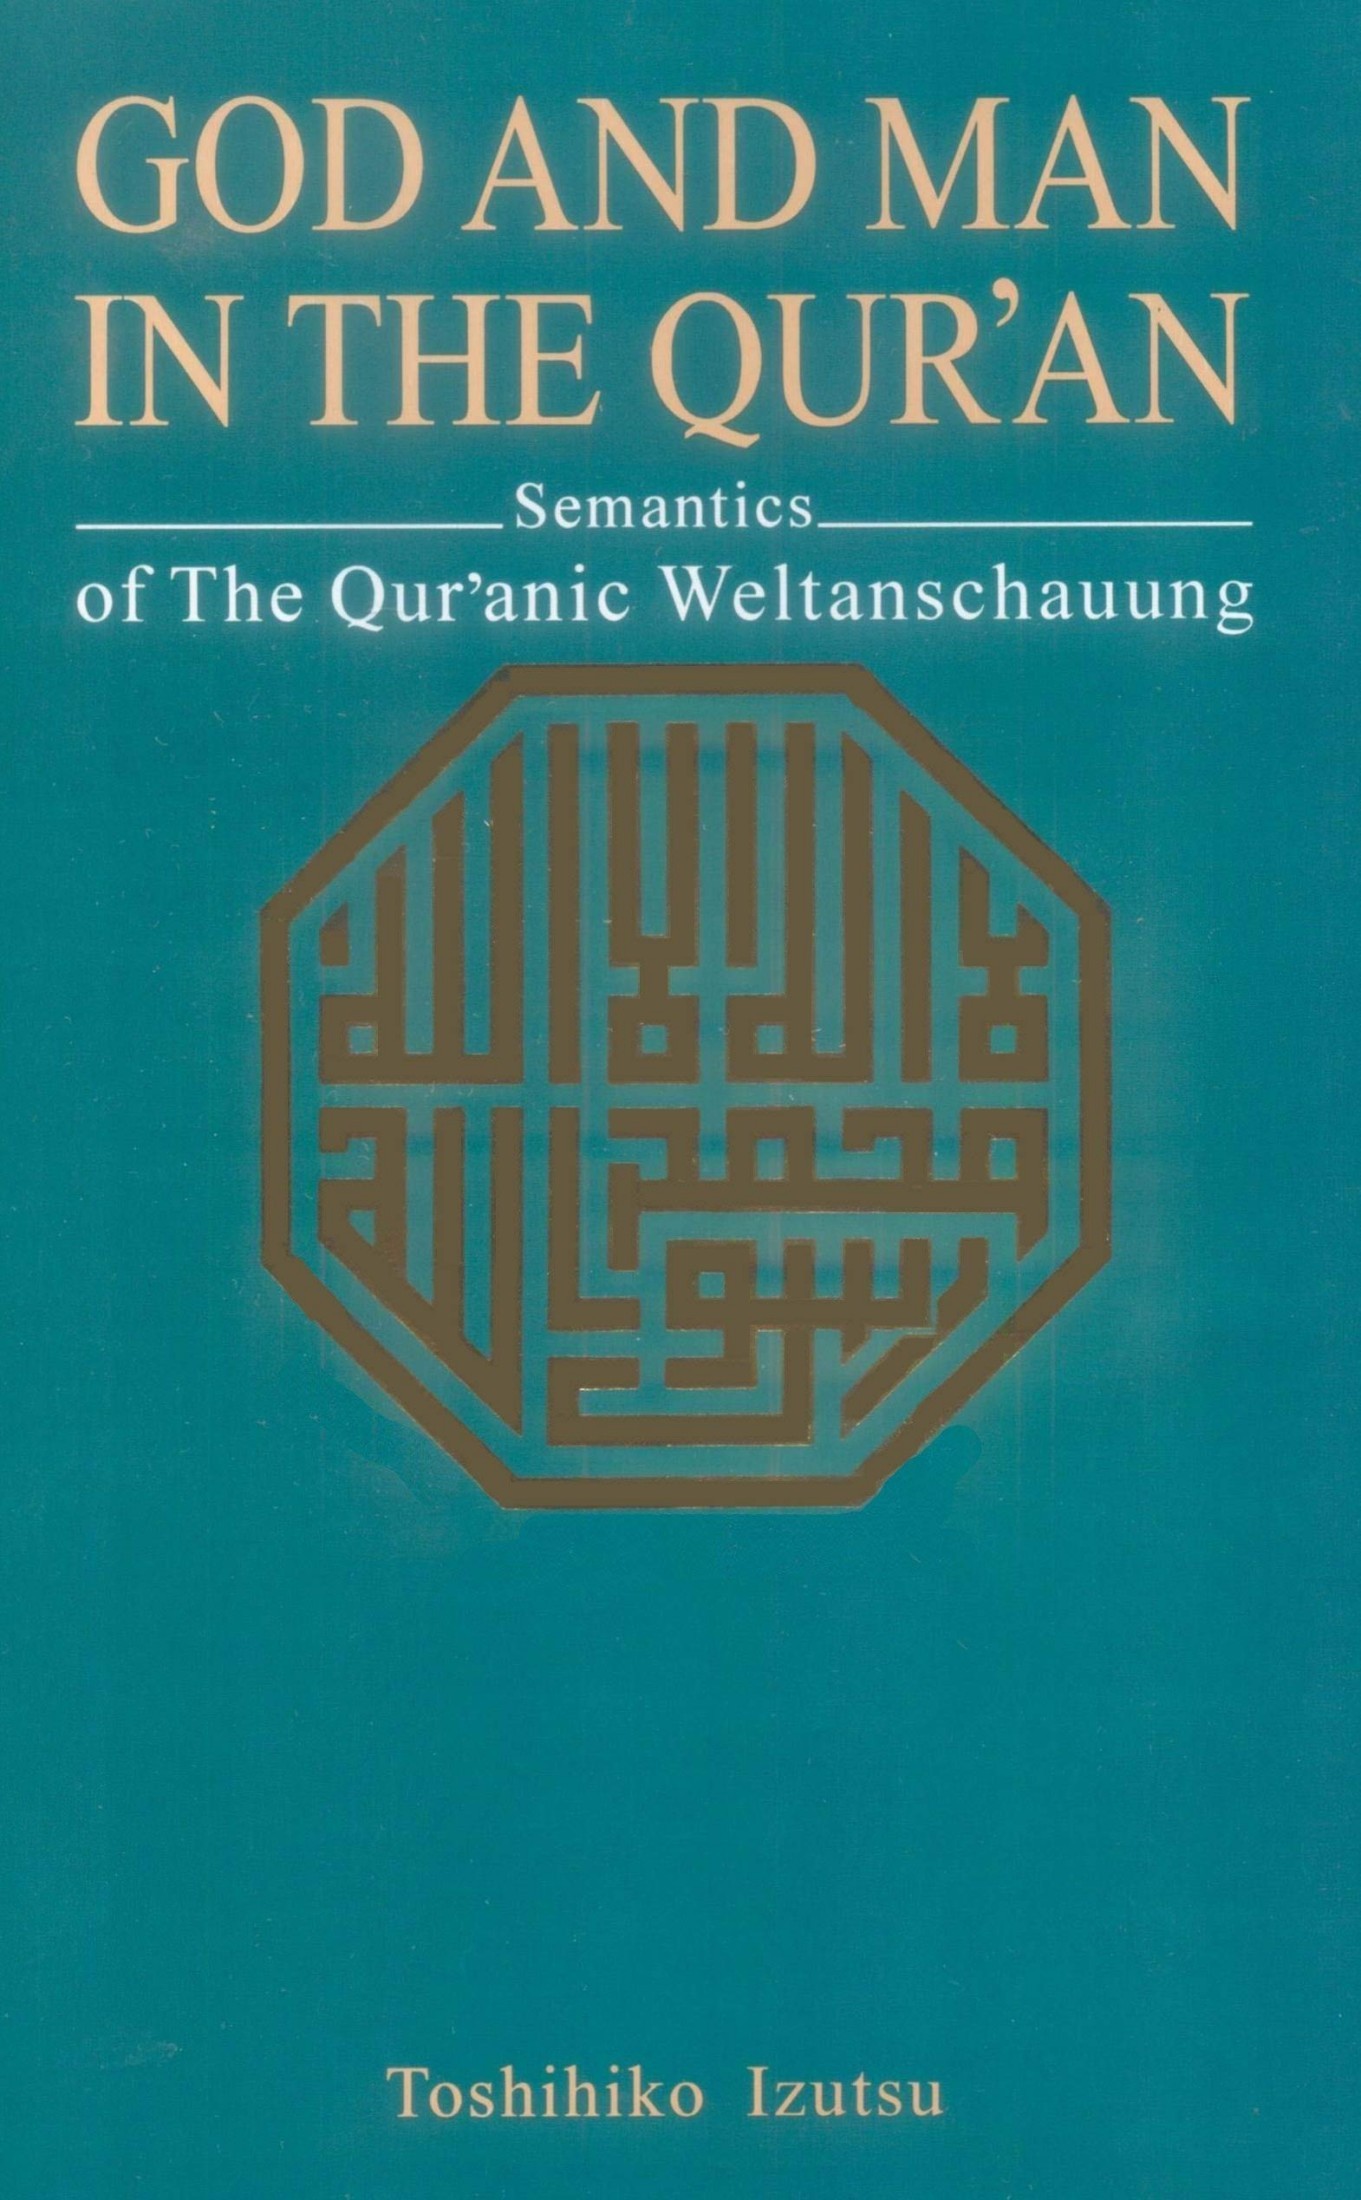 God and Man in the Koran - Semantics of the Qur'anic Weltanschauung